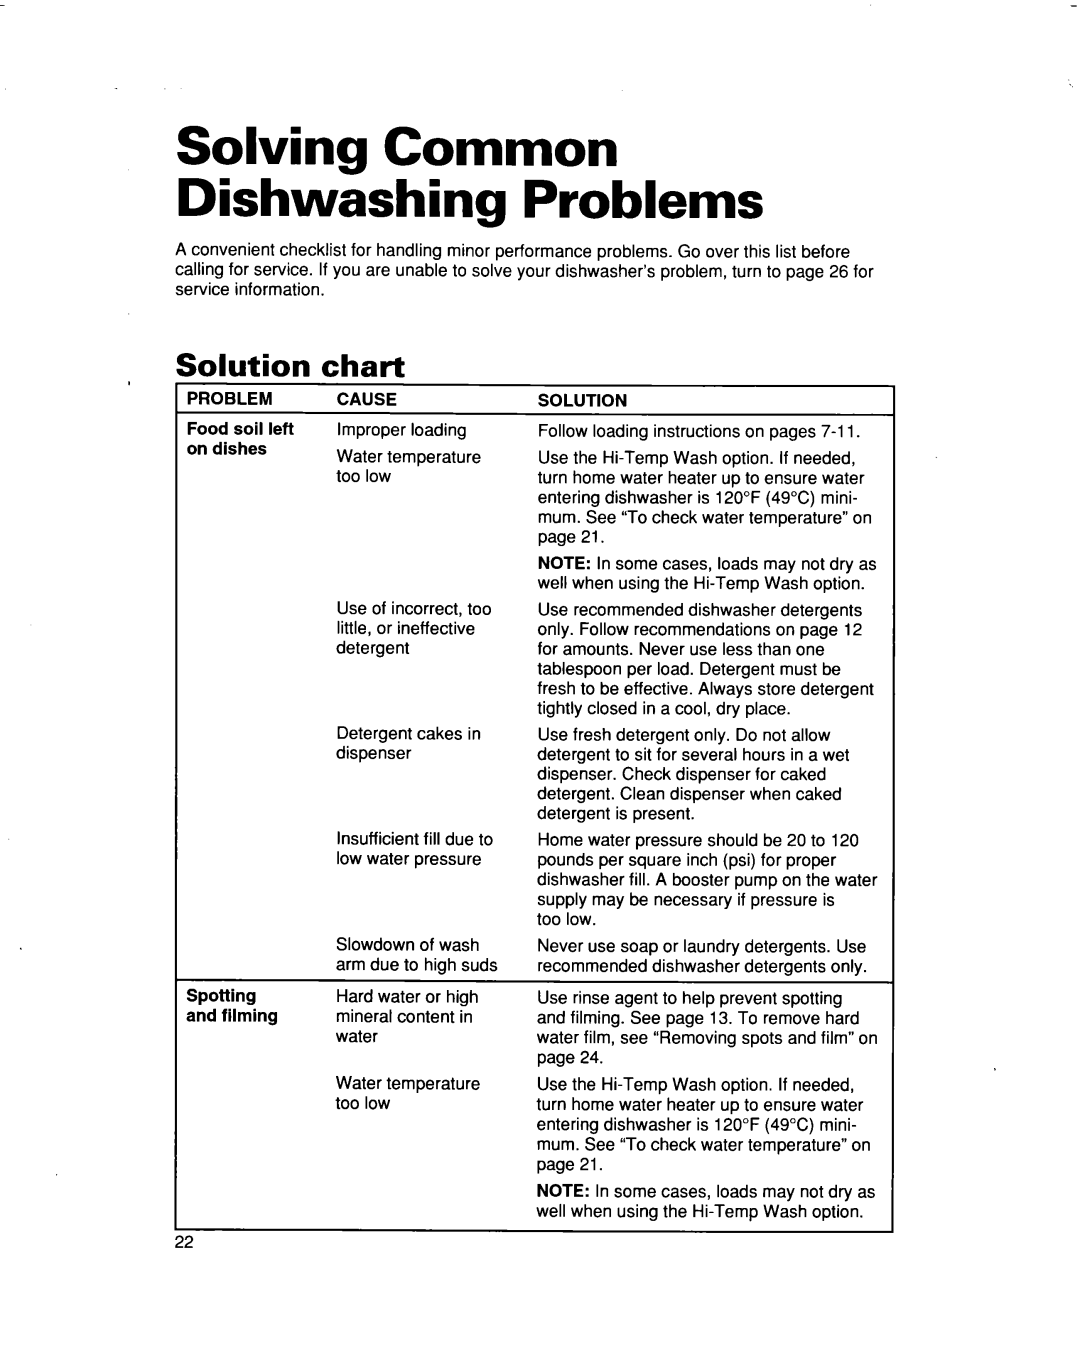 Whirlpool 915 warranty Solving Common Dishwashing Problems, Solution, chart 